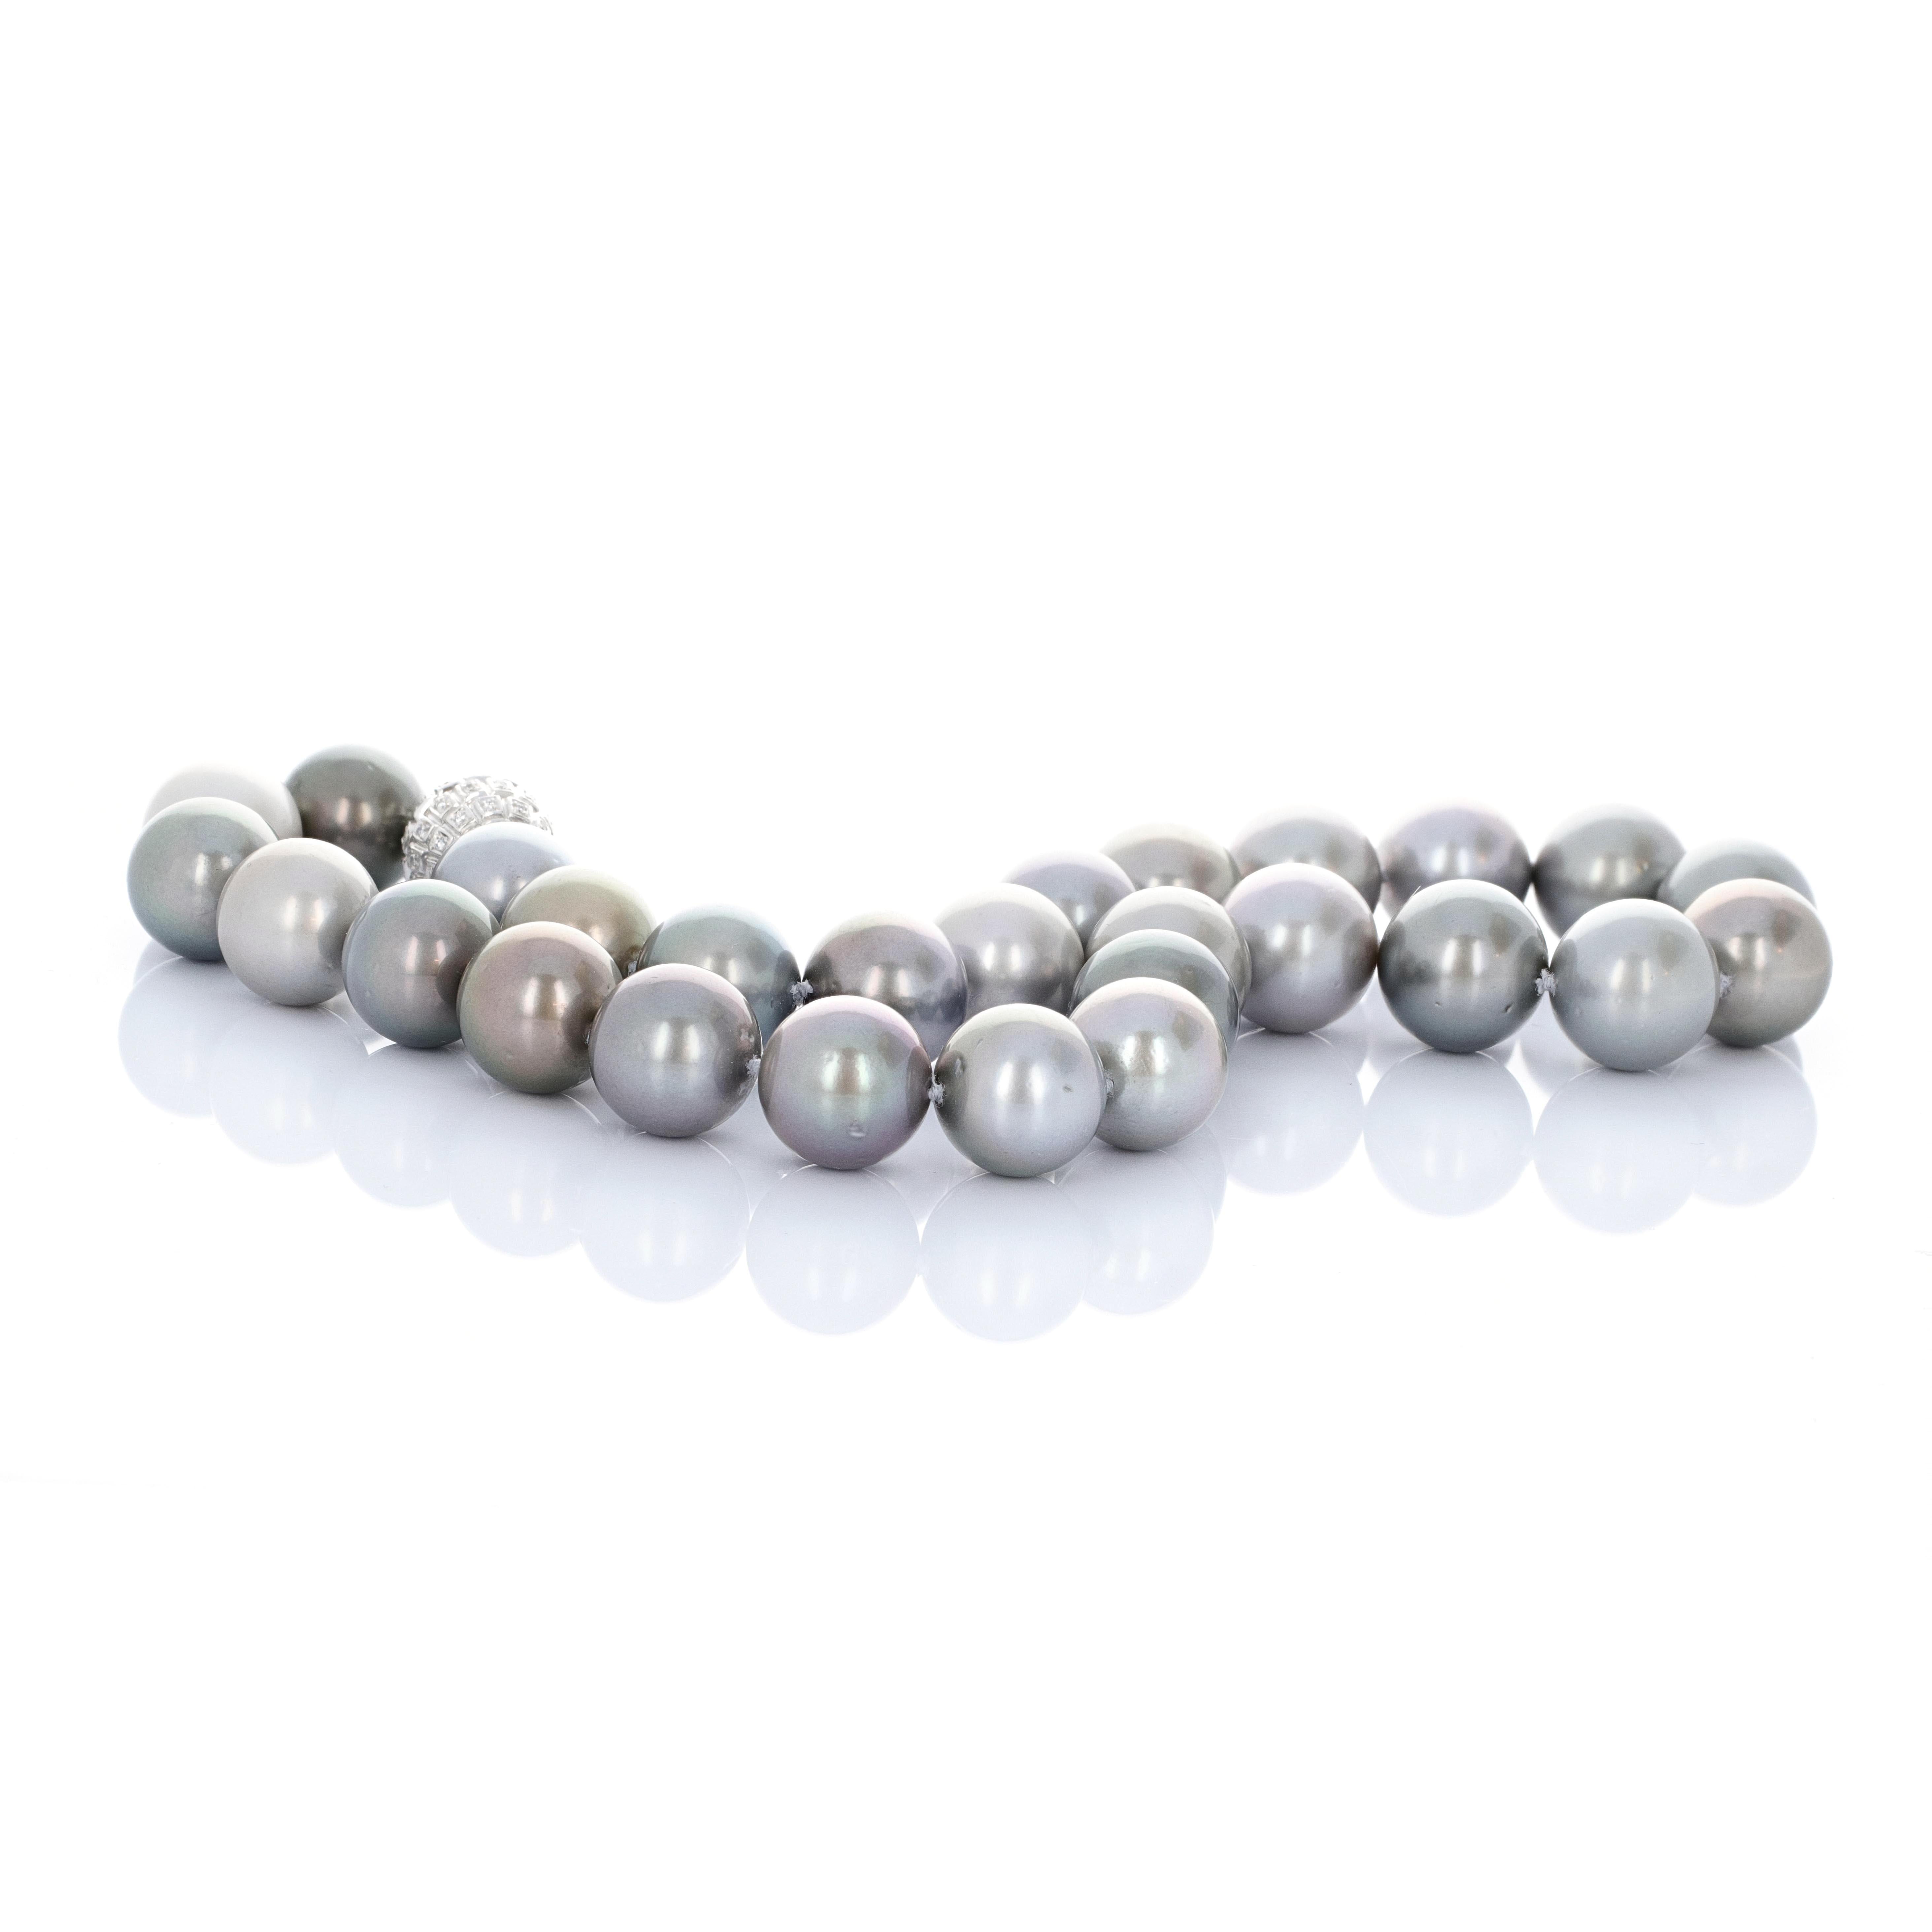 A classic black South Sea Tahitian pearl necklace with a diamond clasp. The necklace is made up of 27 pearls graduating in size from 15mm- 16.1 mm. There is a beautiful diamond clasp which adds some sparkle to the necklace. The diamond clasp has